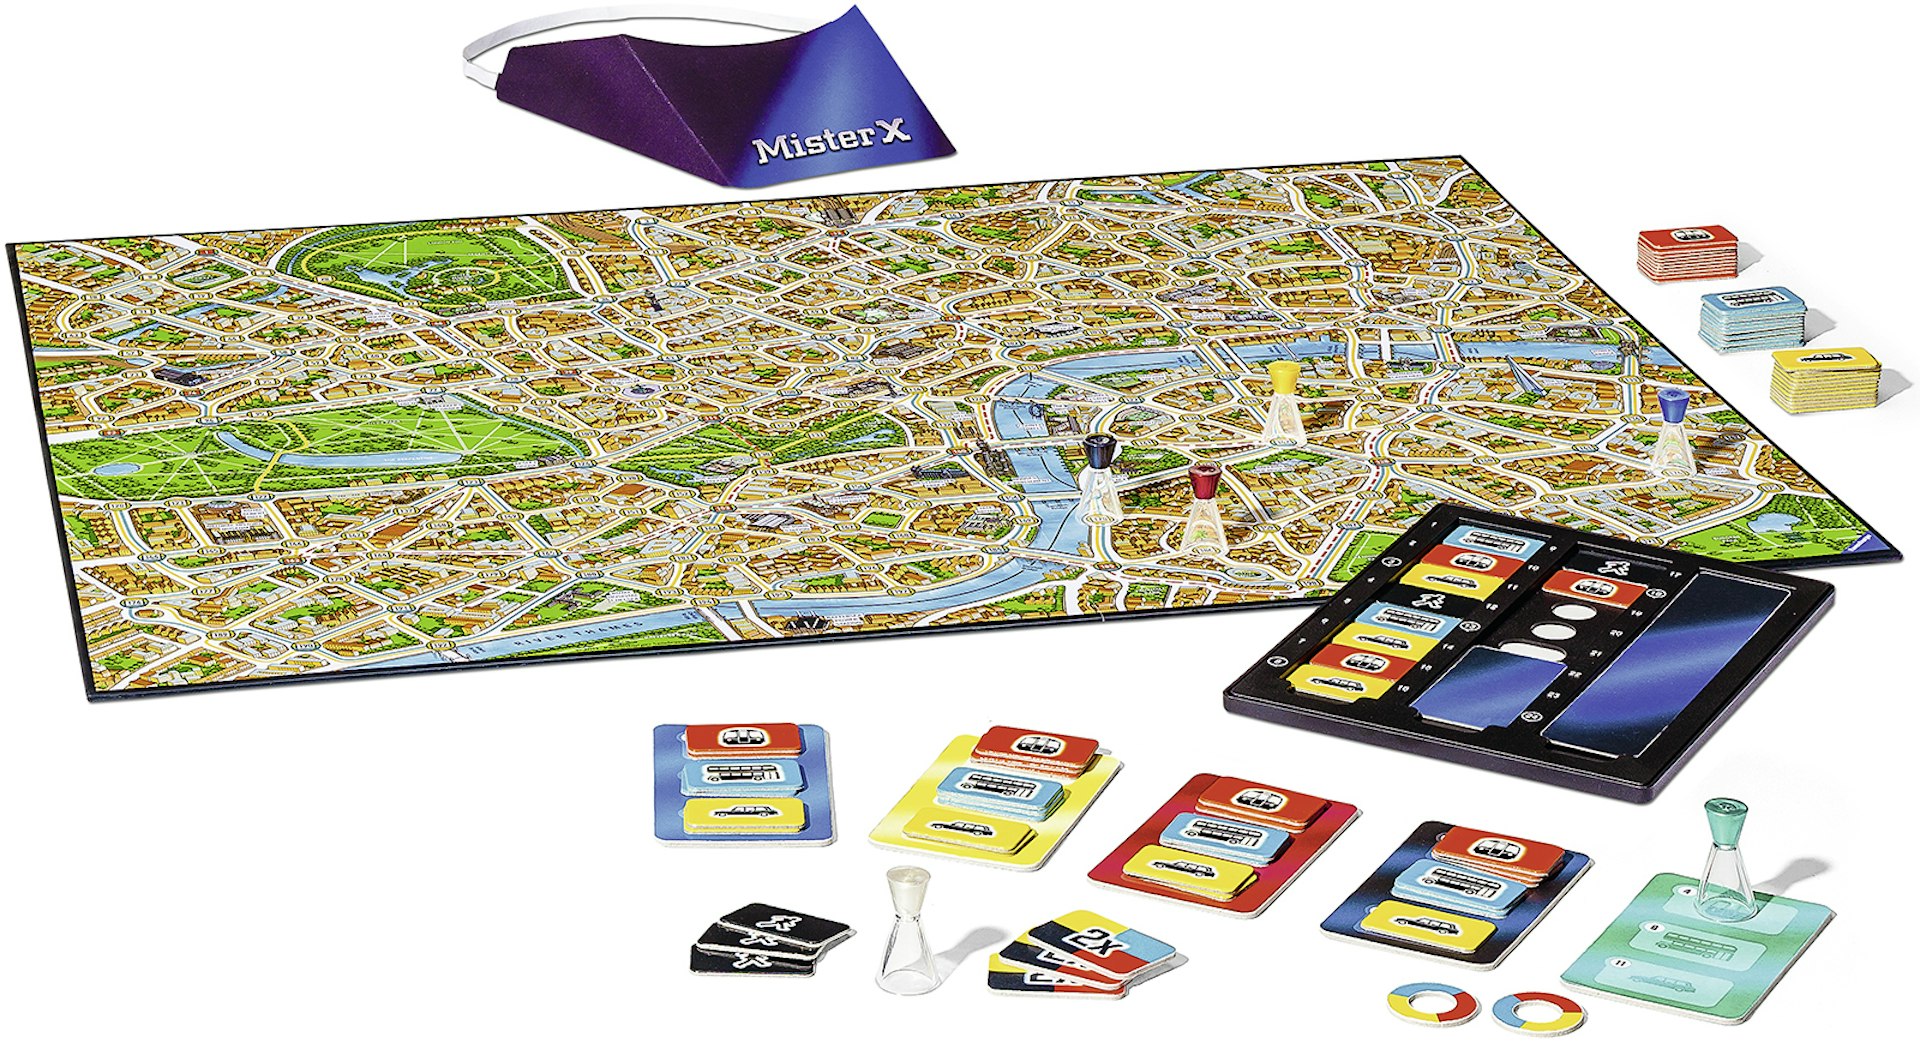 The board game Scotland Yard is laid out on a white background